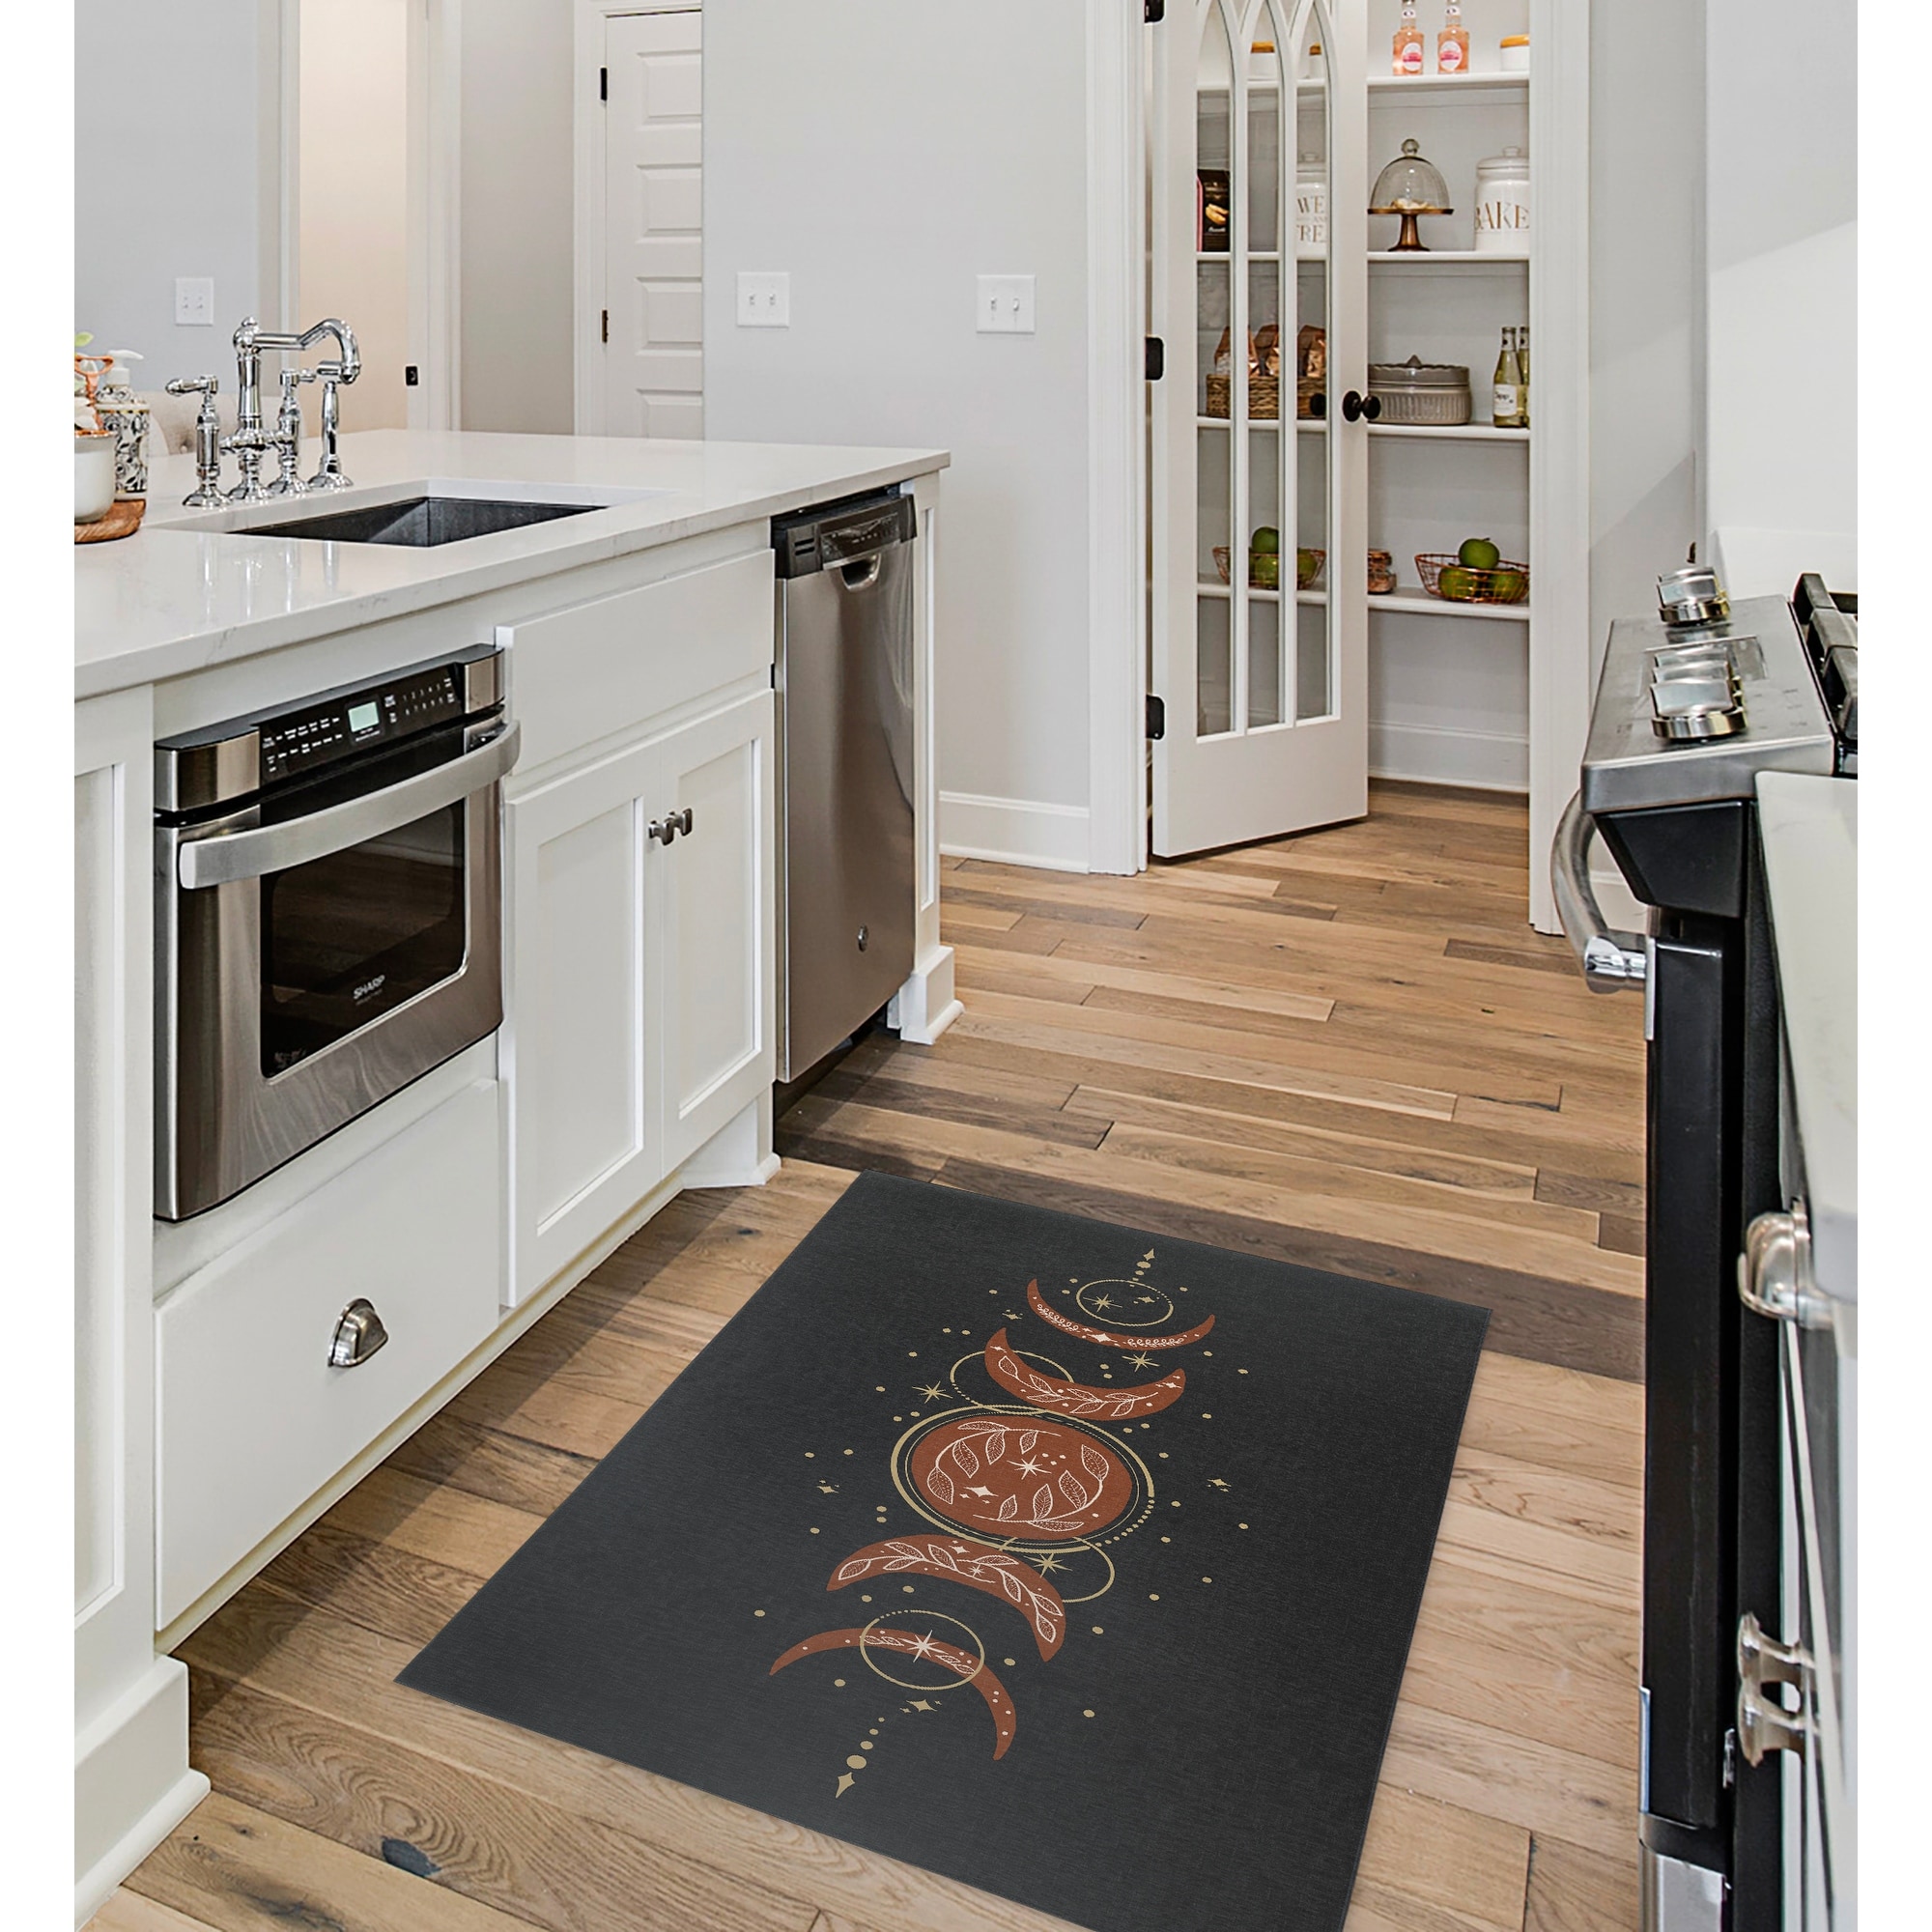 https://ak1.ostkcdn.com/images/products/is/images/direct/92ac4c81f94bc9df9a99a75e91b34c9c28fad523/BOHO-PHASES-Kitchen-Mat-By-Kavka-Designs.jpg